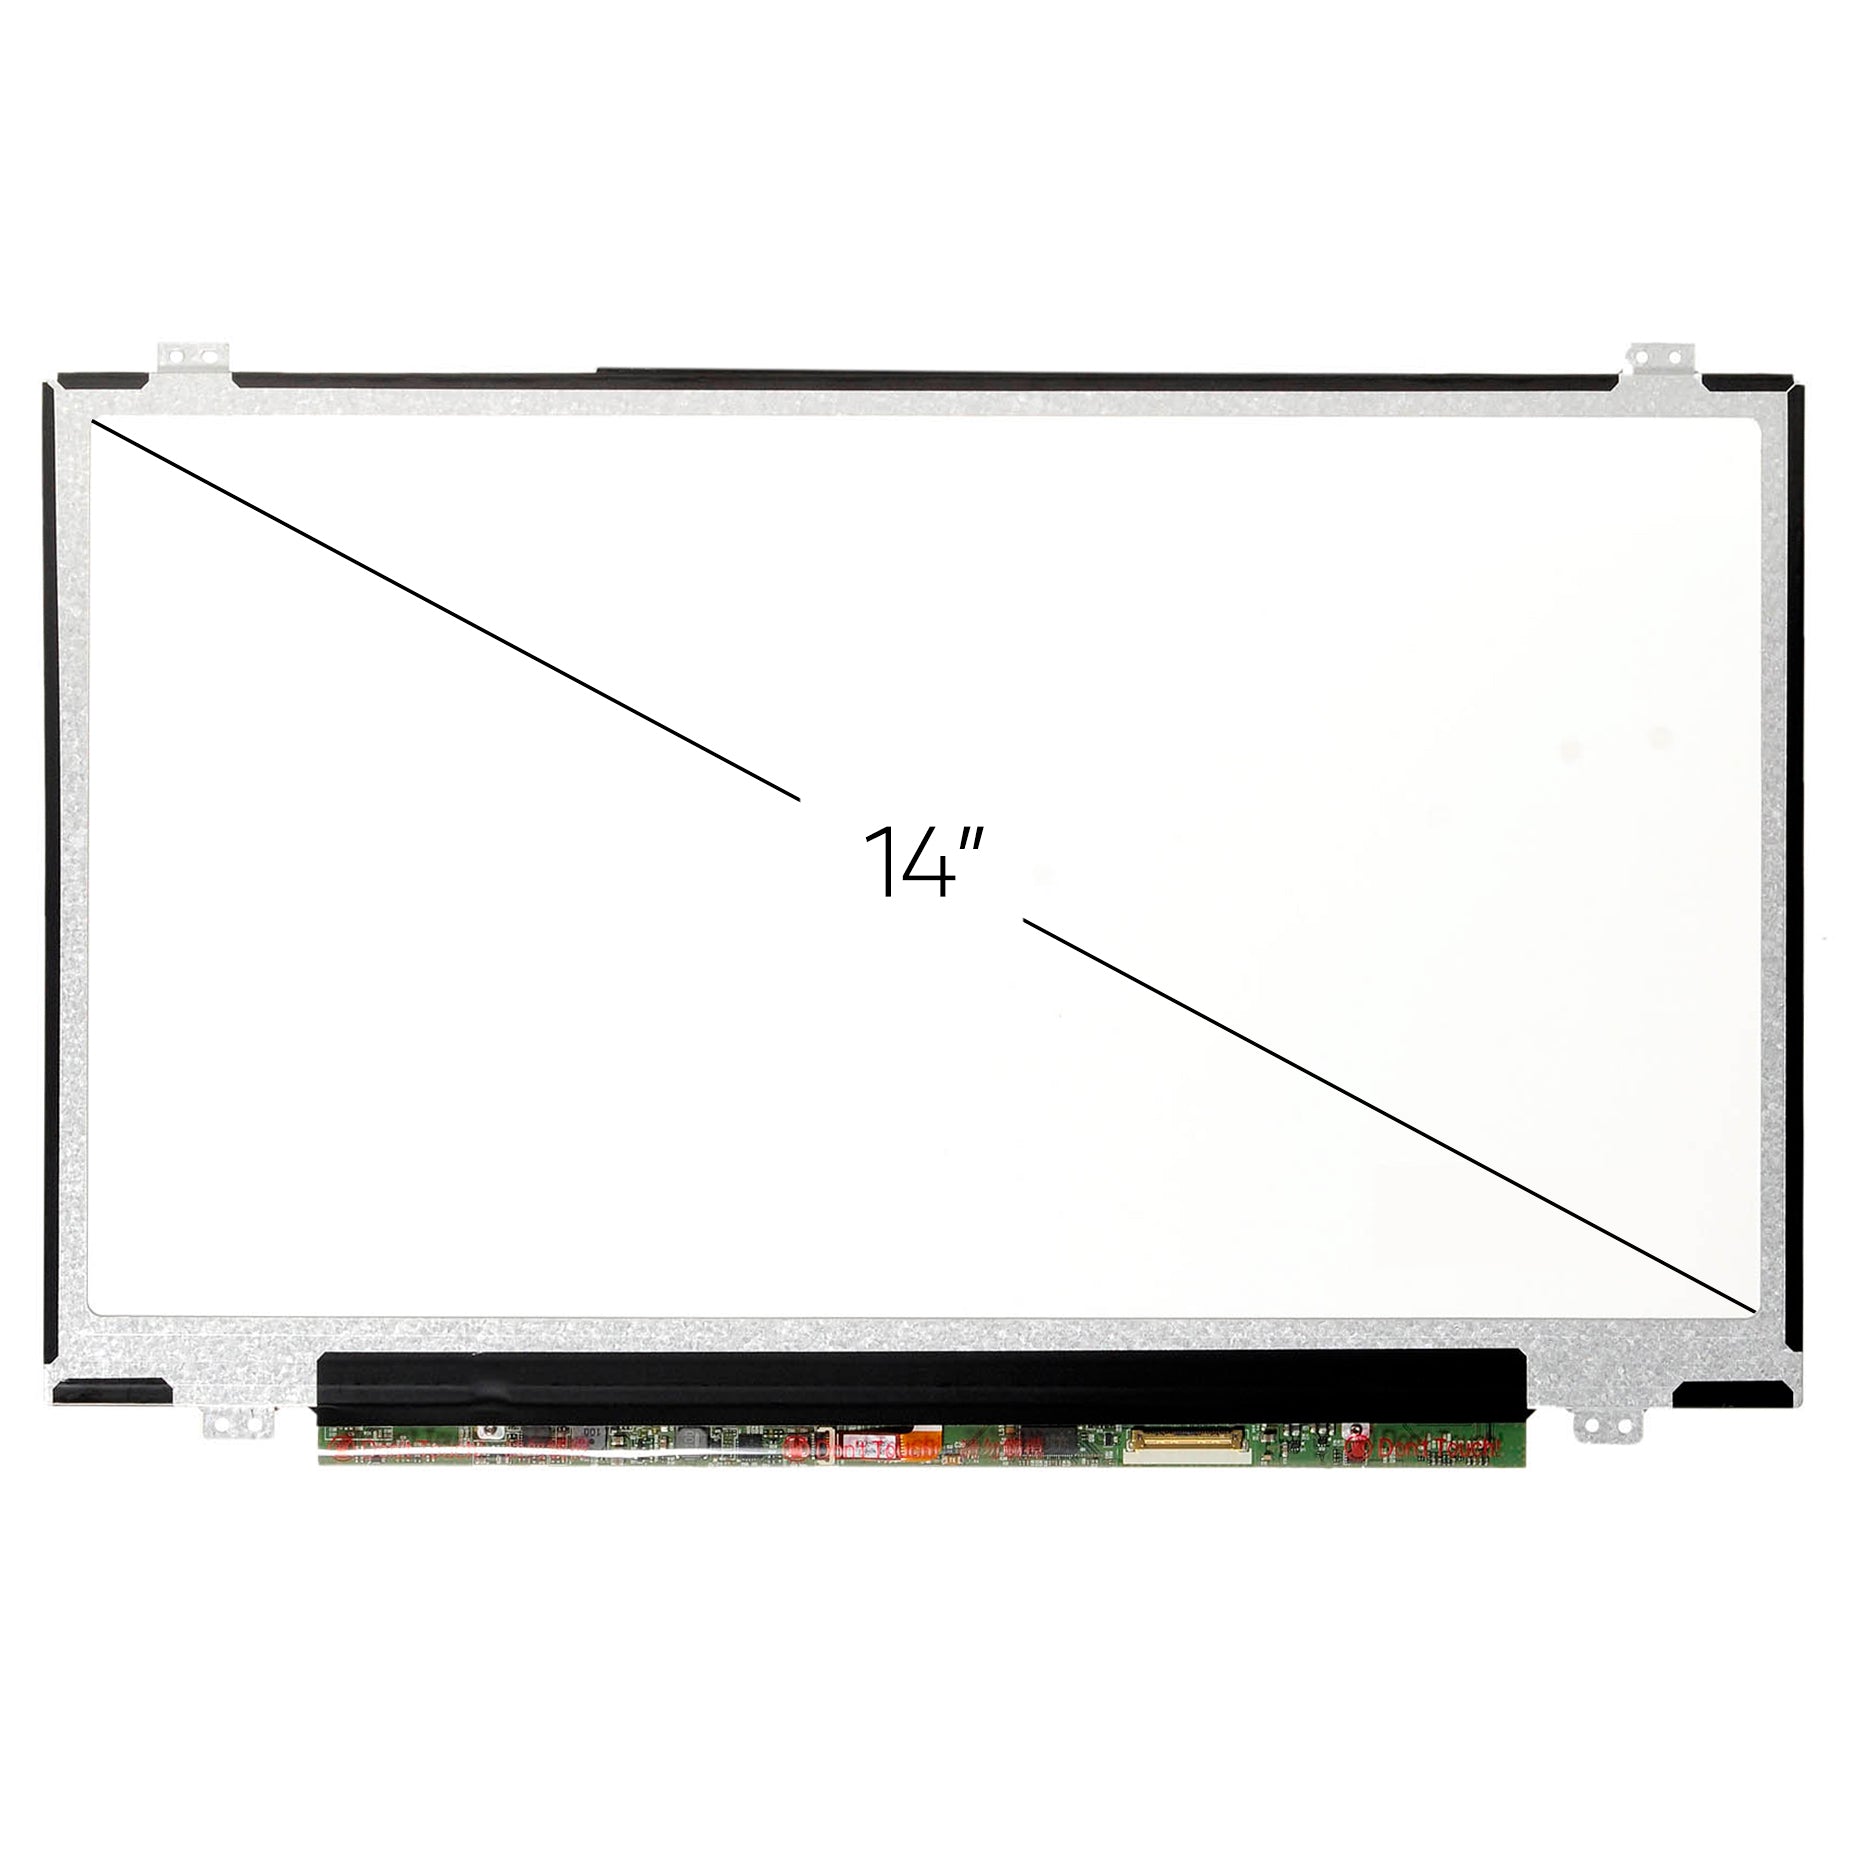 Screen Replacement for N140HCA-EAB Rev.C1 FHD 1920x1080 IPS Matte LCD LED Display